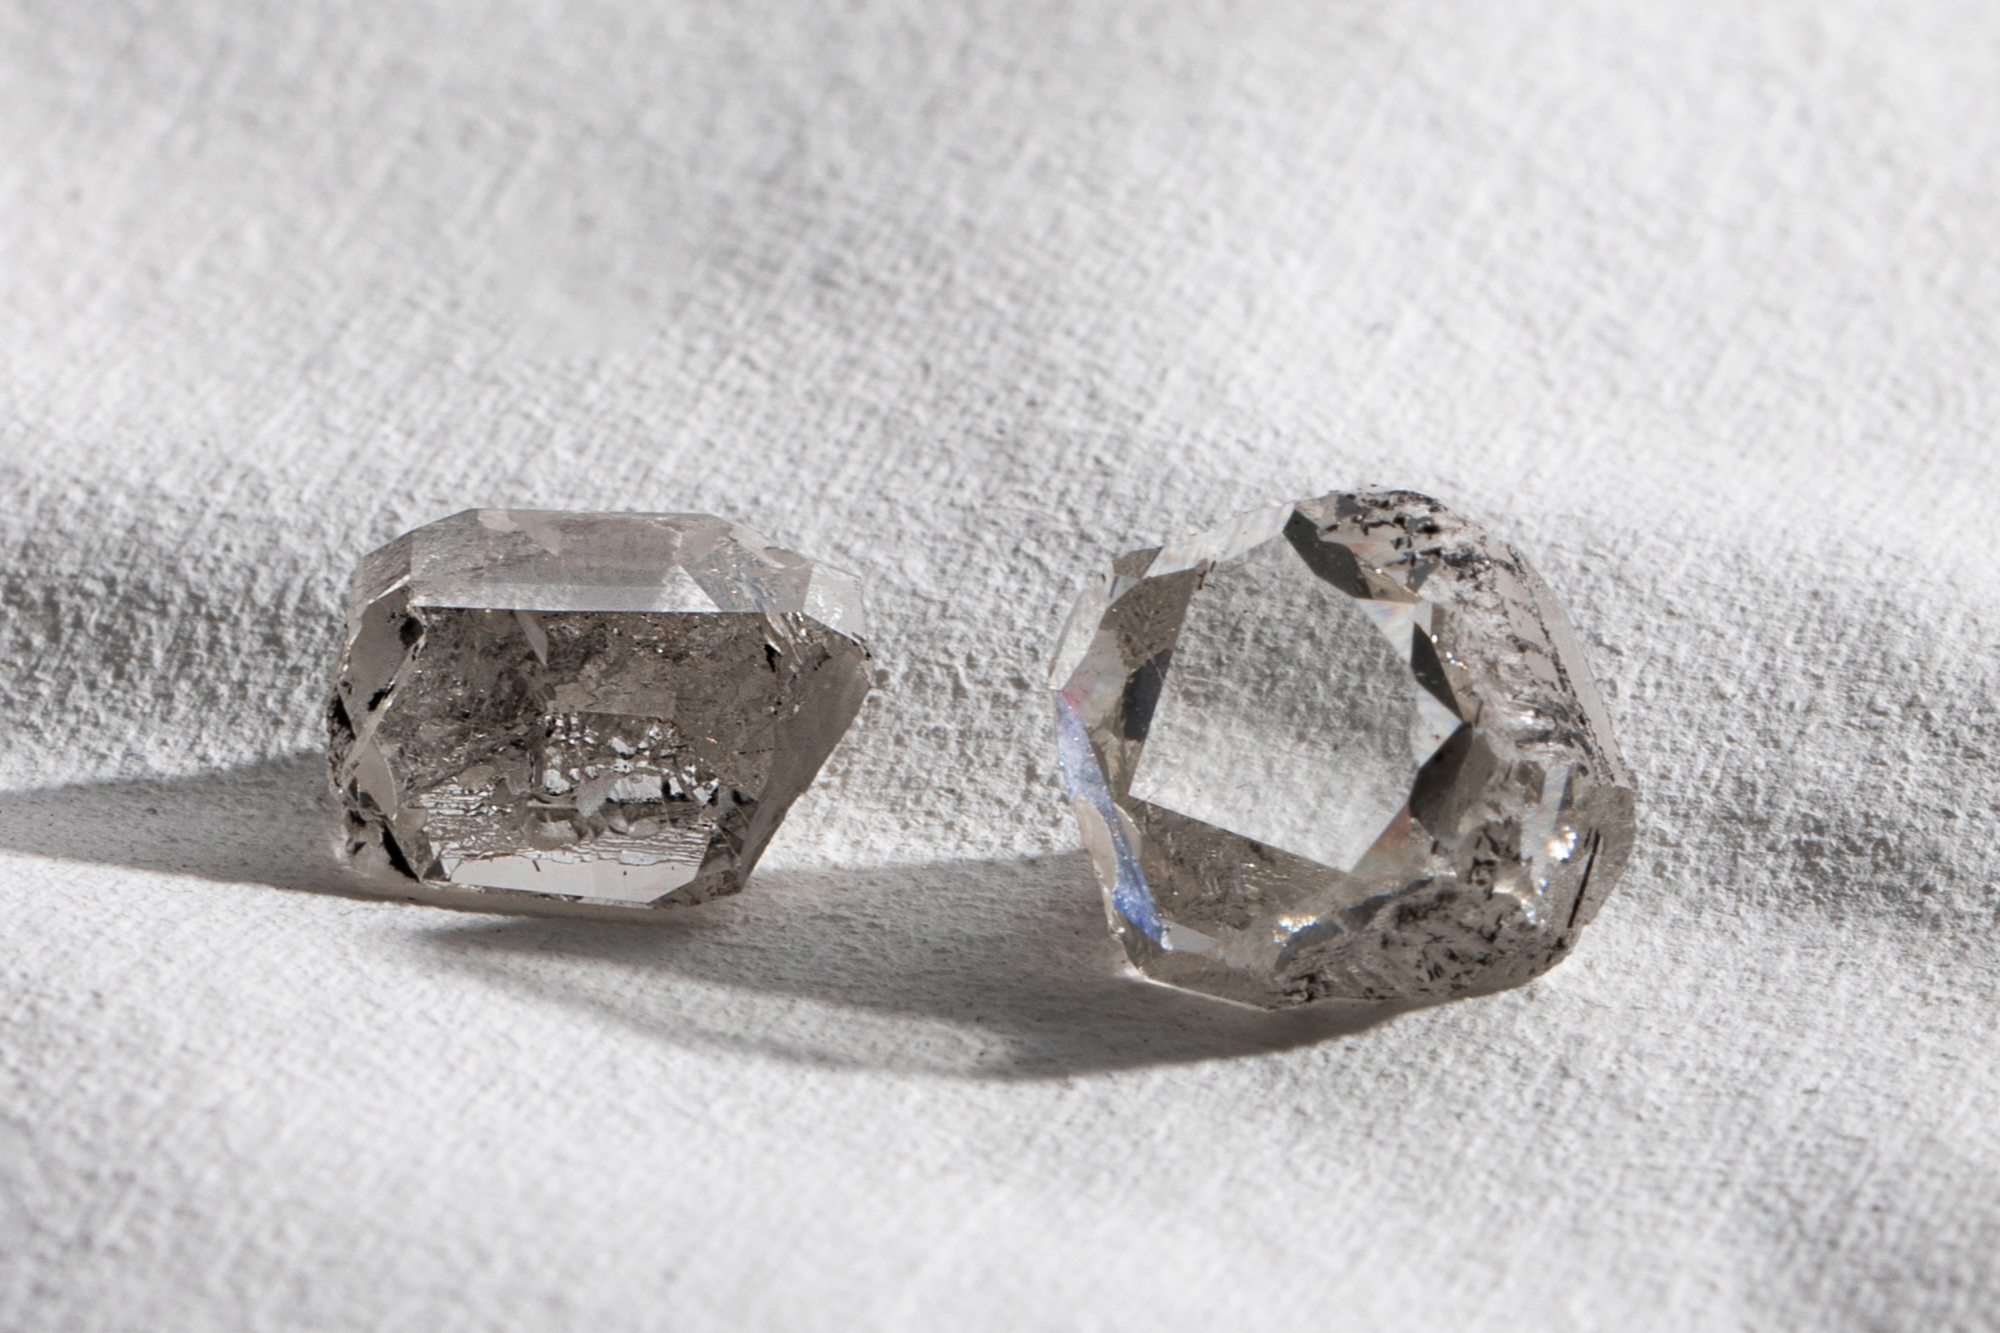 How to Tell If a Diamond Is Real: Spotting Fake Diamonds